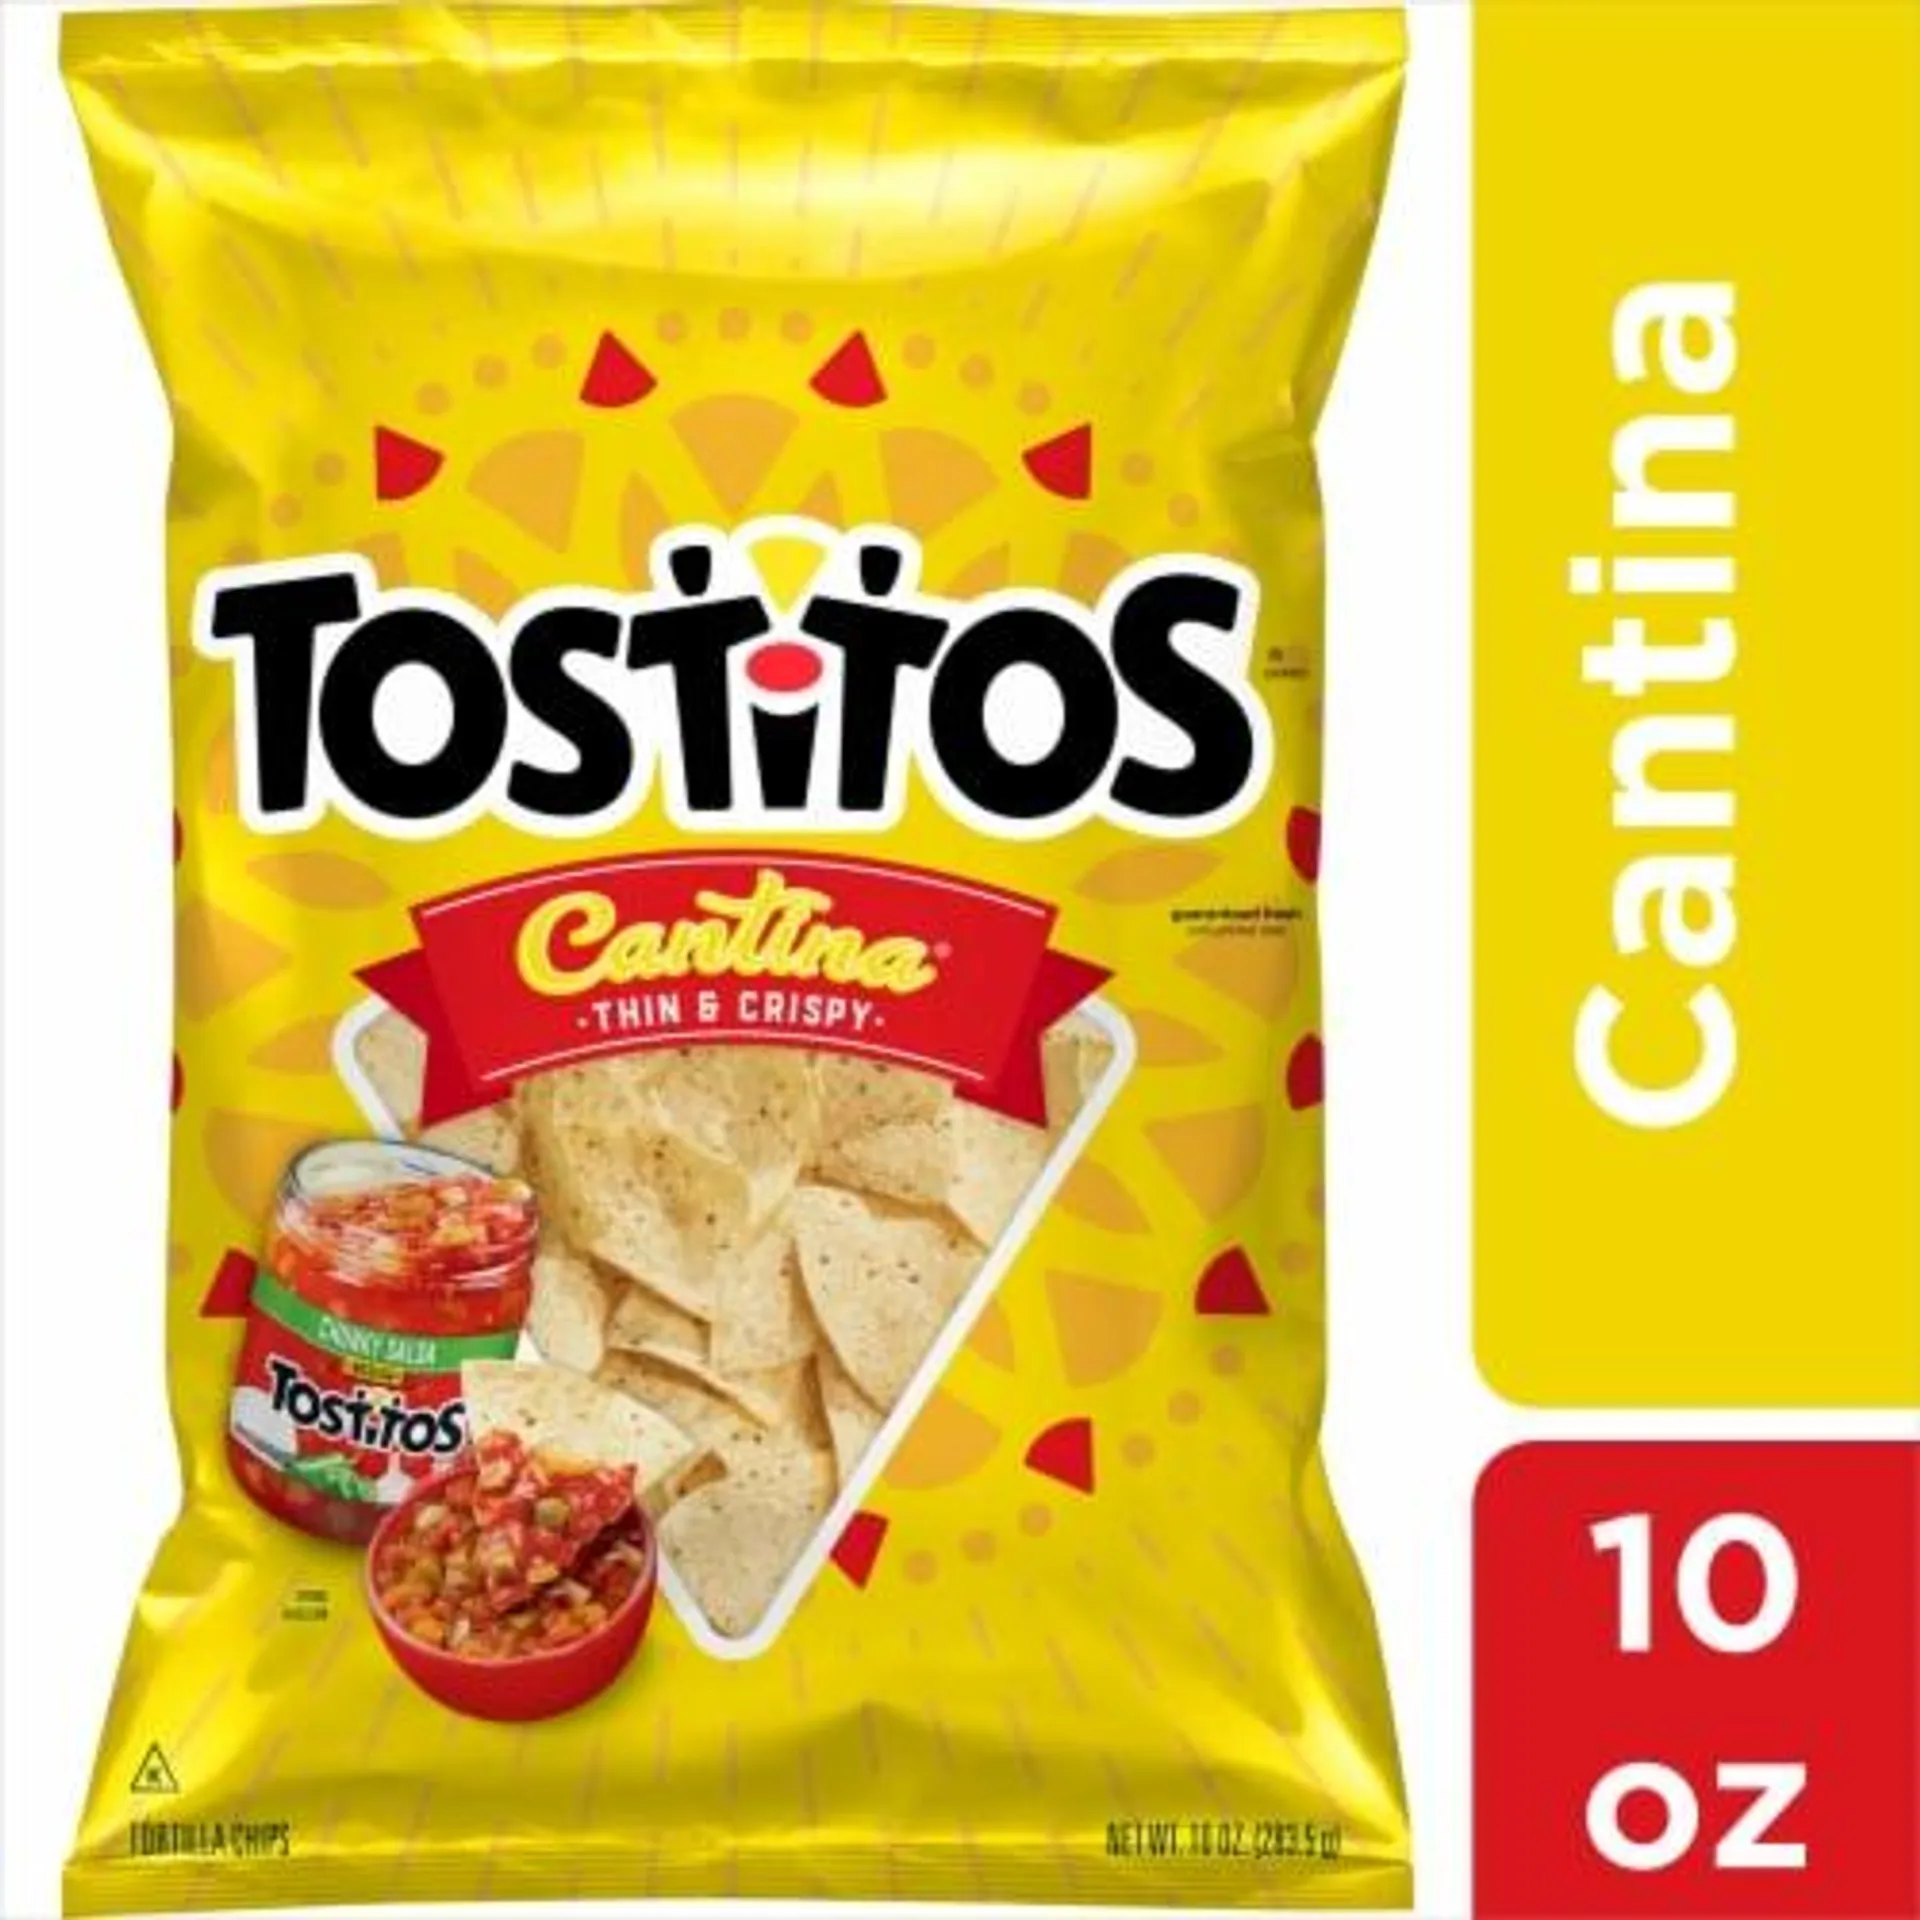 Tostitos® Cantina Thin and Crispy Tortilla Chips